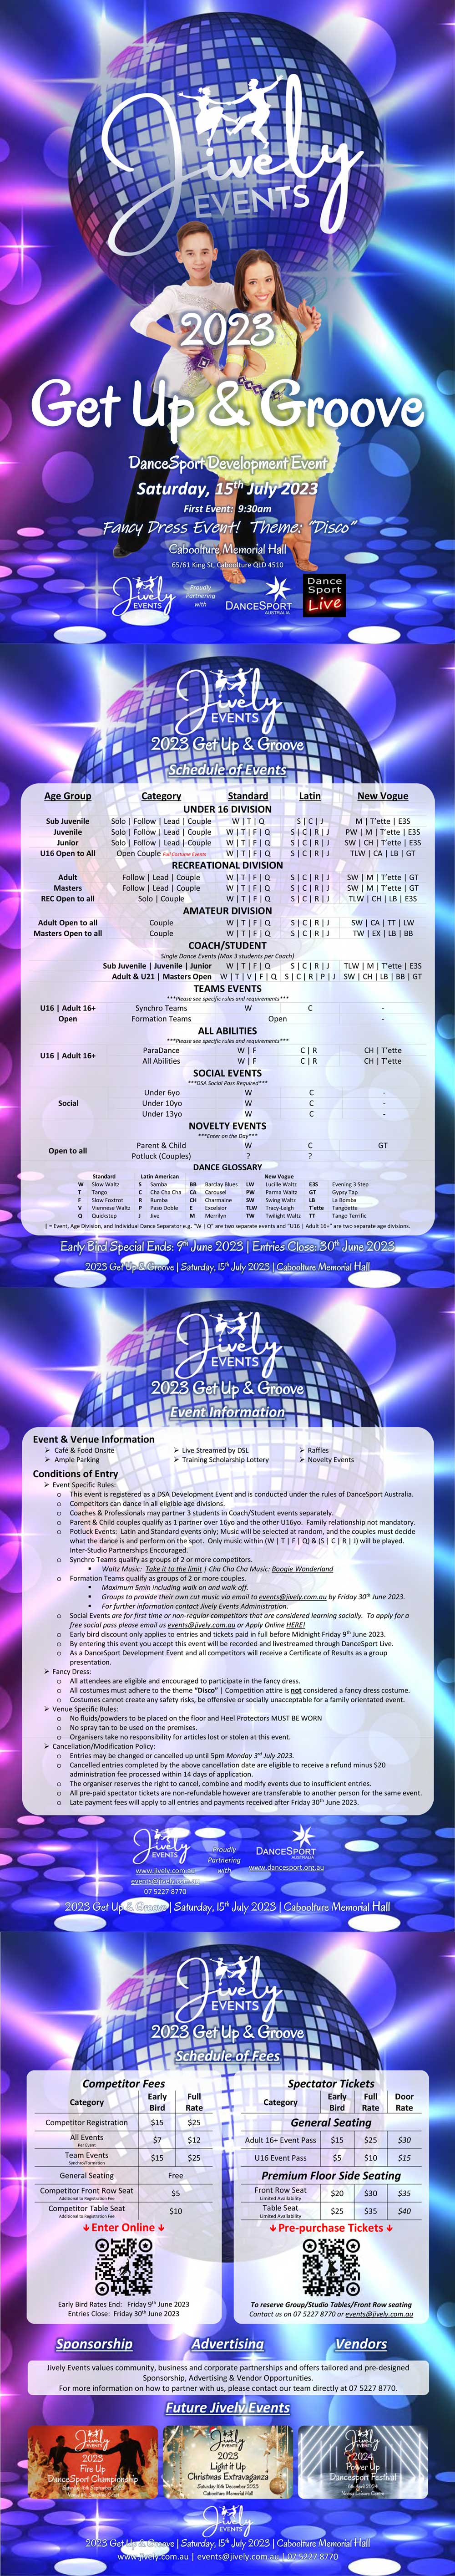 Syllabus for 2023 Jively Get Up & Groove DanceSport Development Event